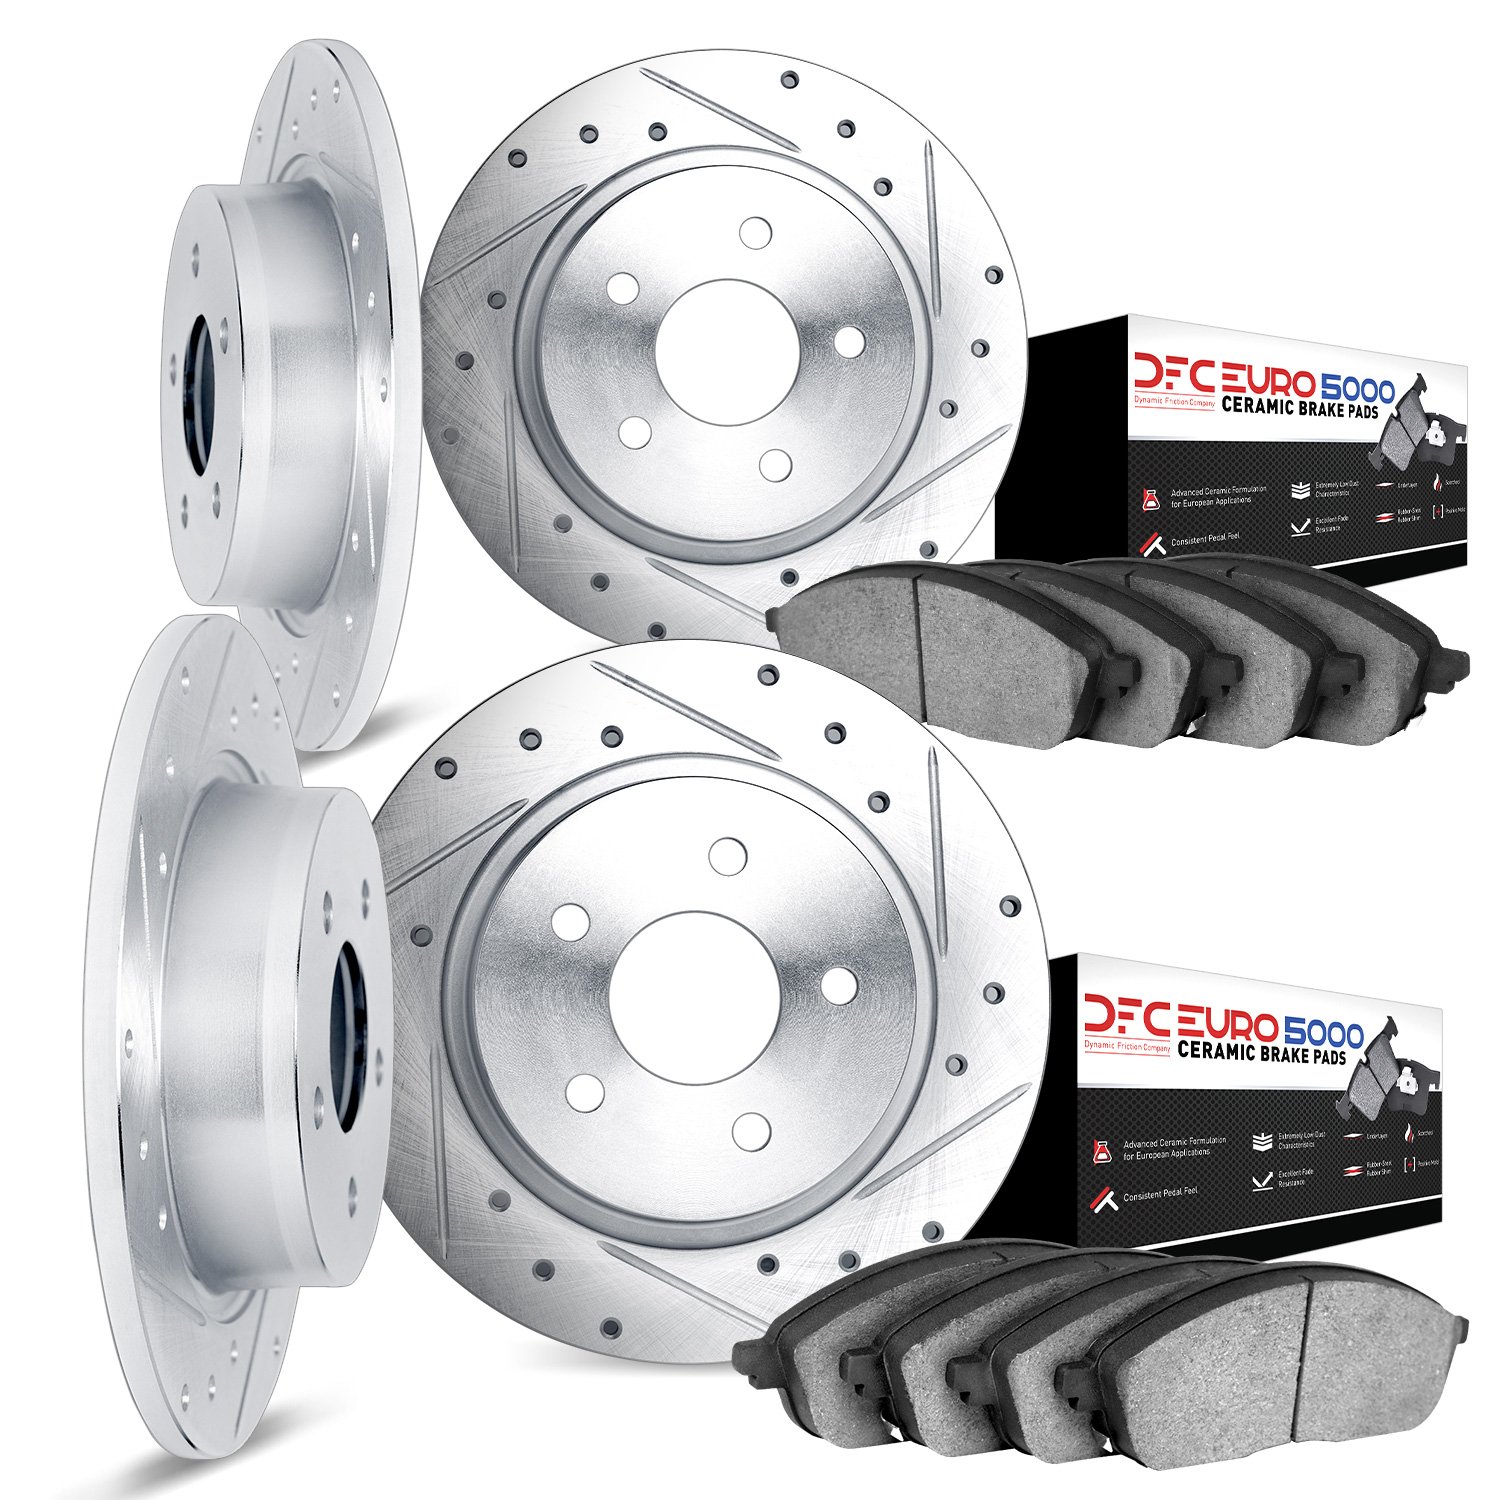 7604-63013 Drilled/Slotted Brake Rotors w/5000 Euro Ceramic Brake Pads Kit [Silver], 1997-1998 Mercedes-Benz, Position: Front an